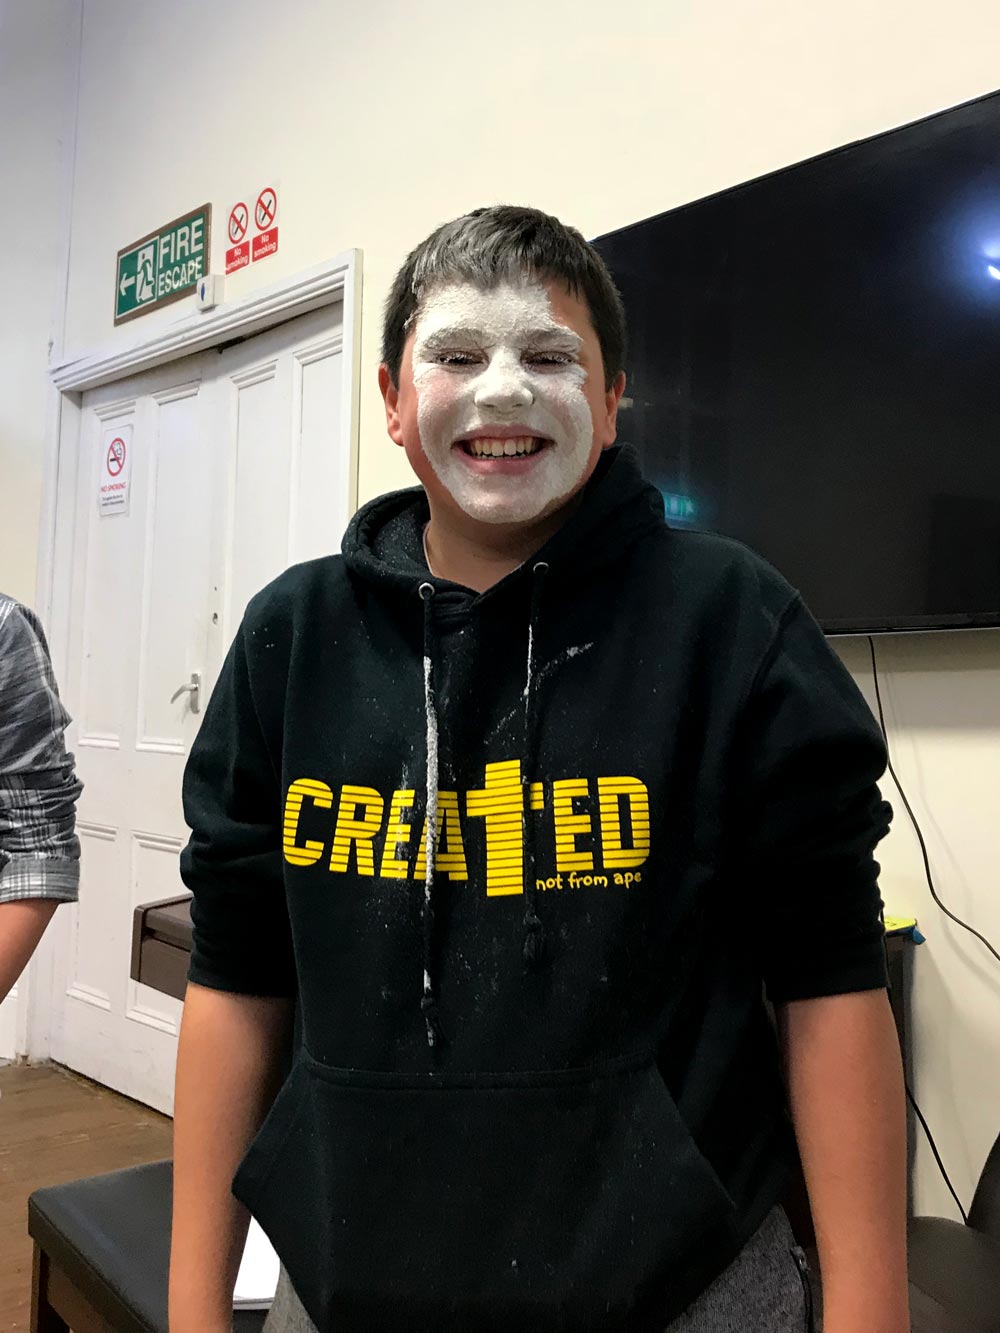 Messy Games at the Youth Cafe